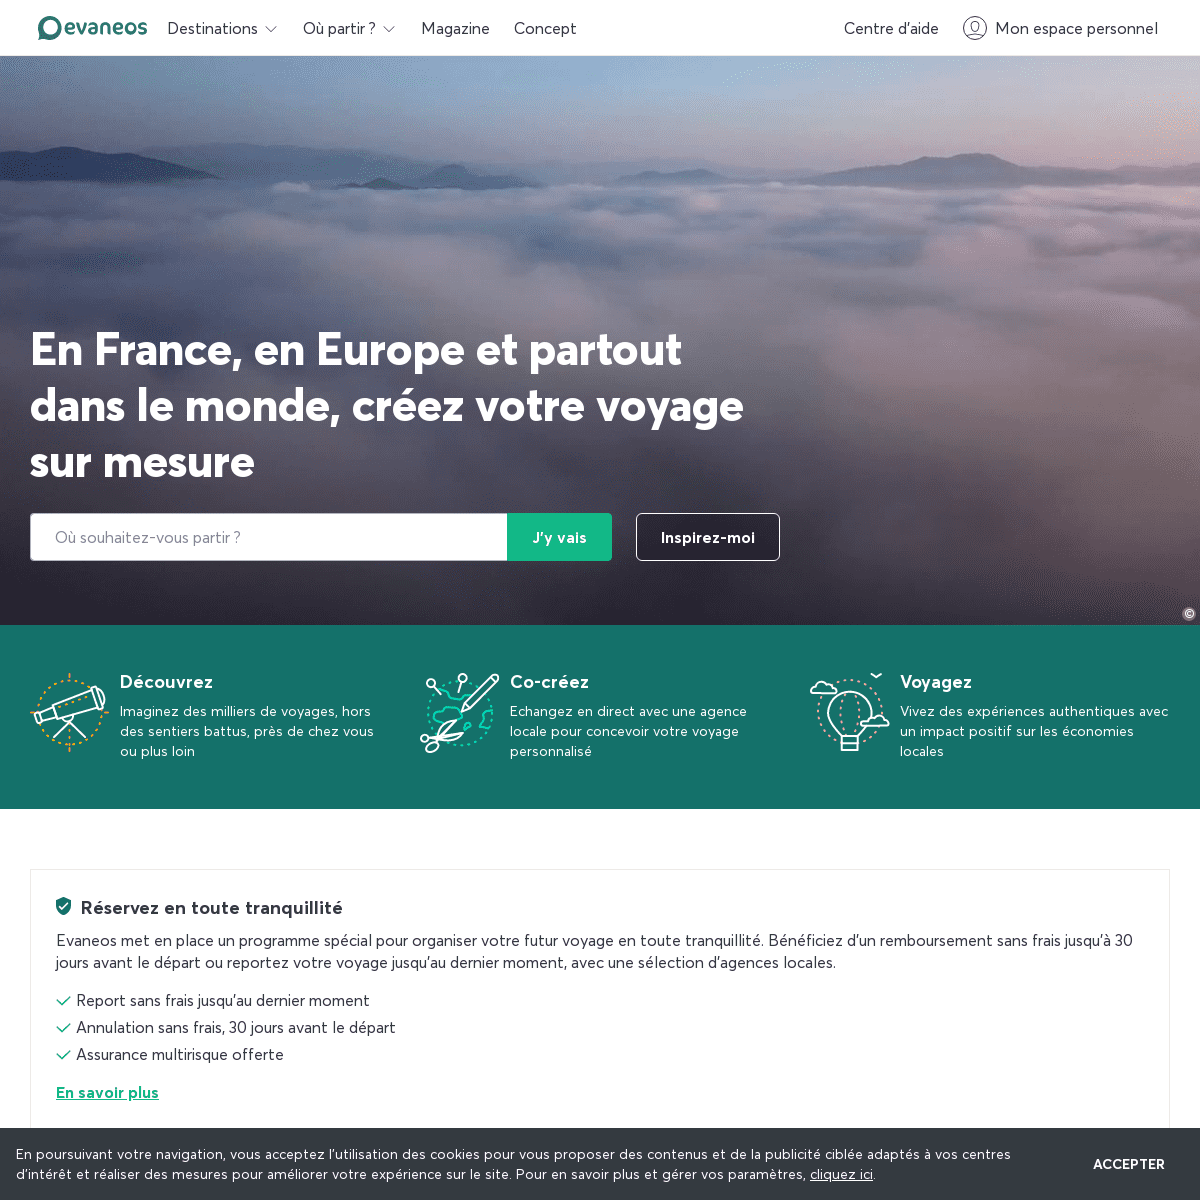 A complete backup of https://evaneos.fr